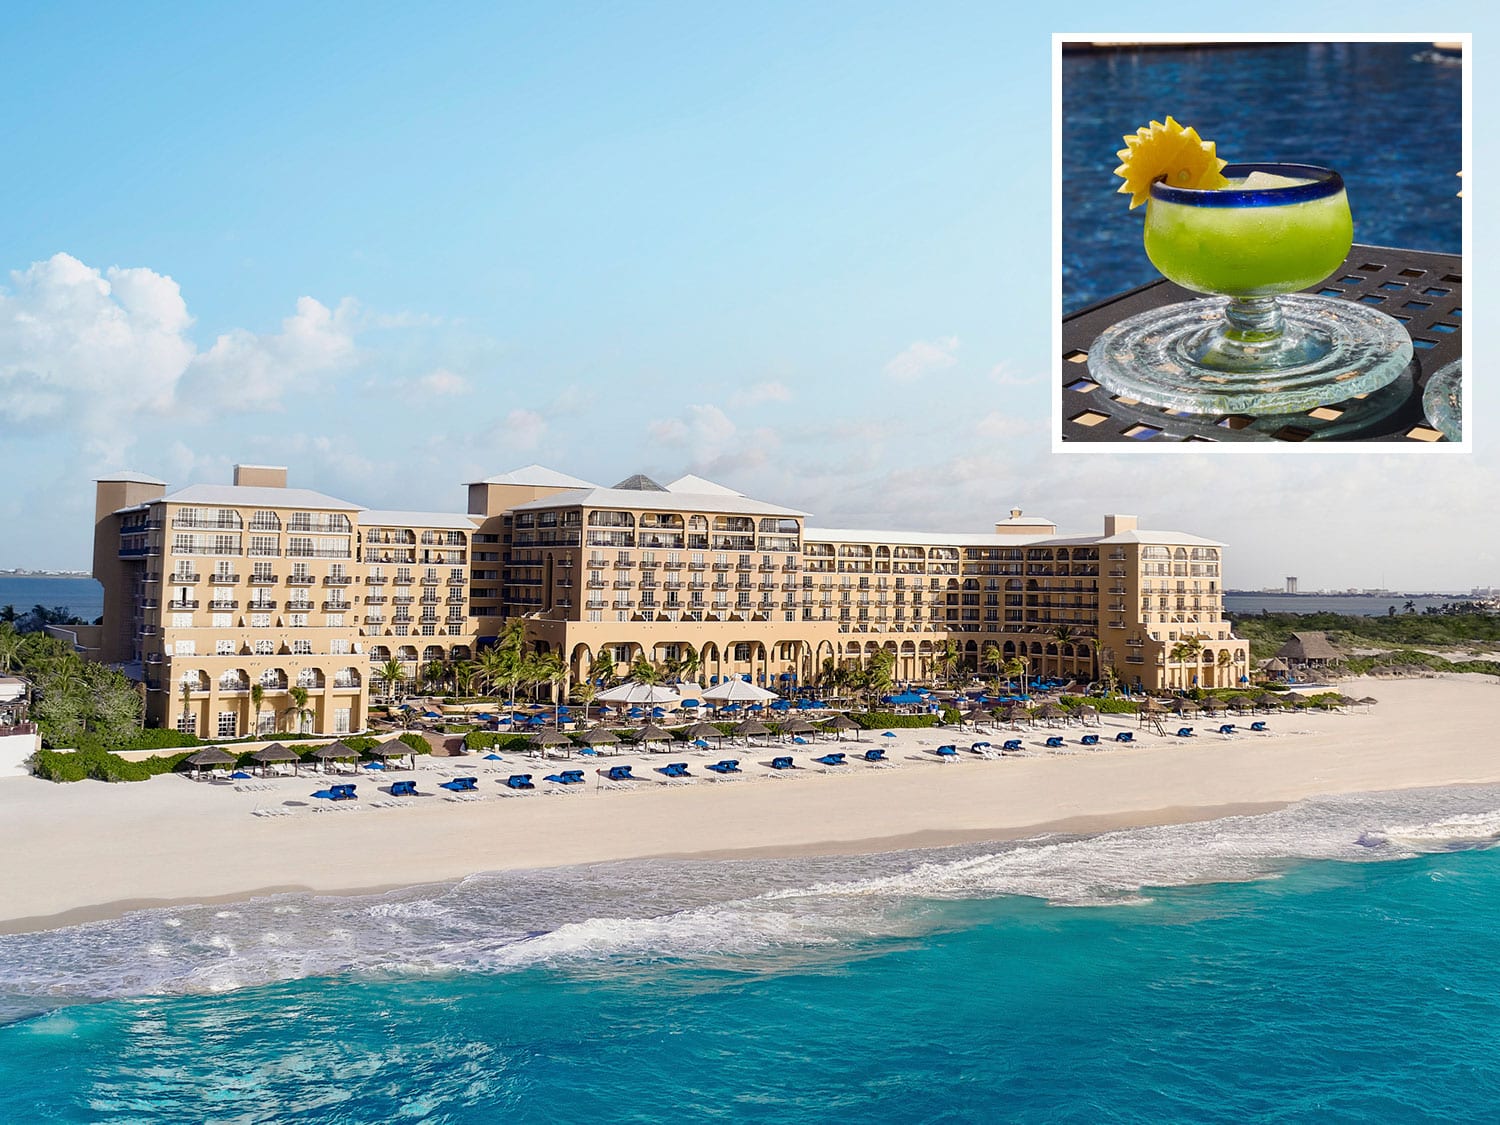 An exterior view of Kempinski Hotel Cancún with the resort bar's signature margarita inset.